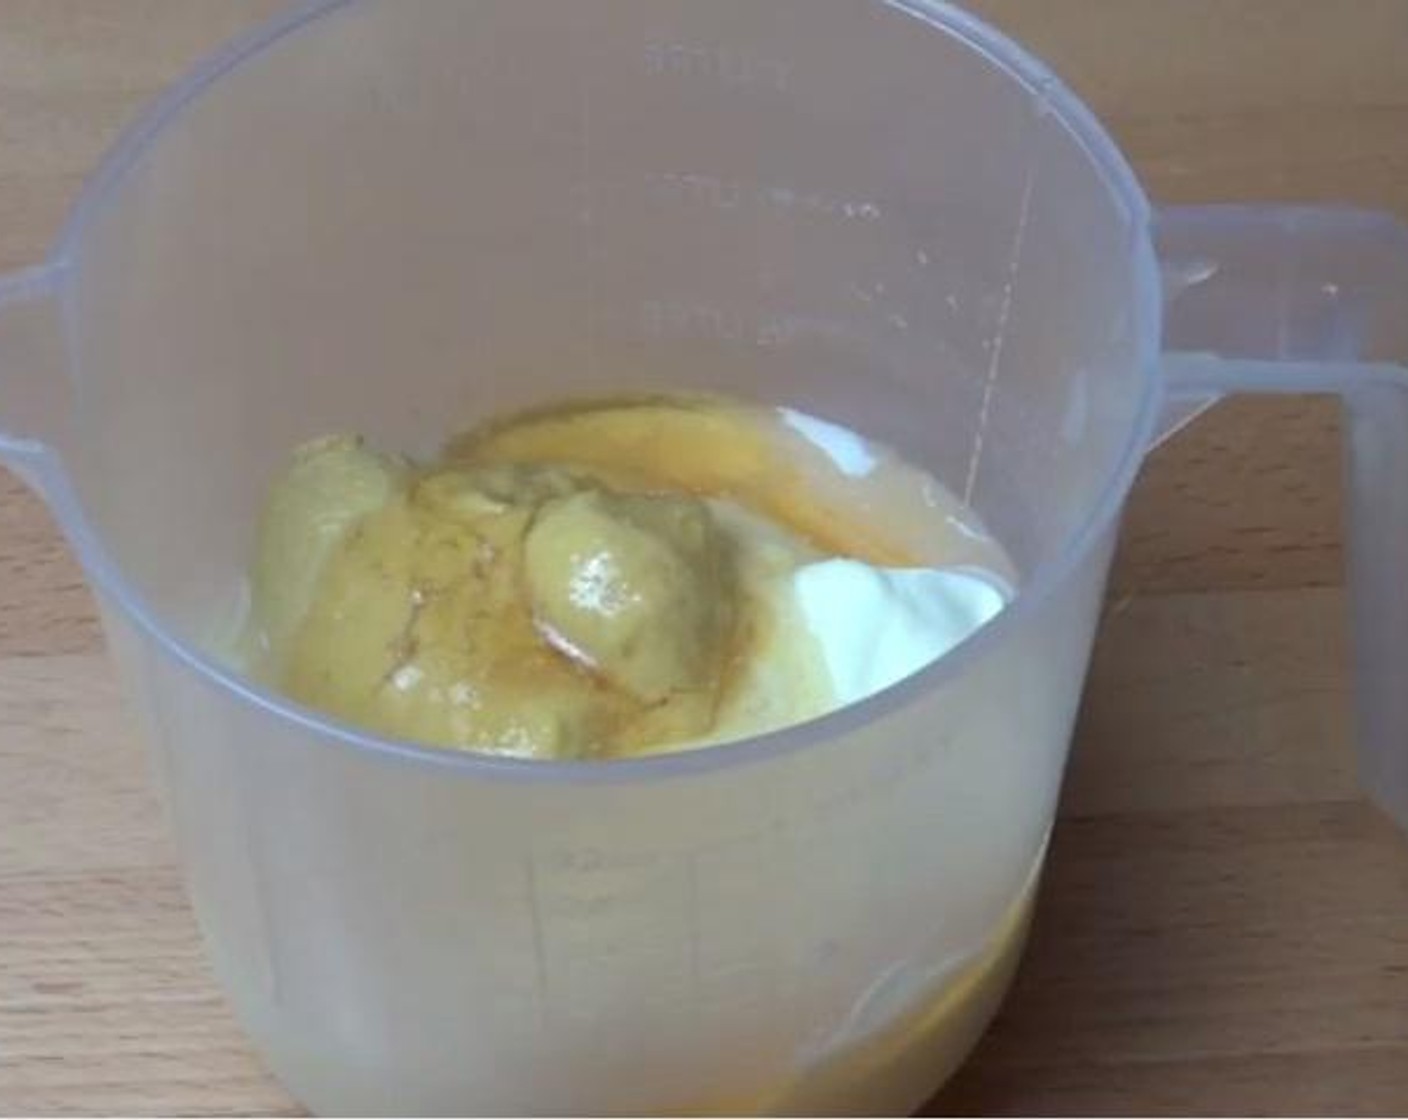 step 2 In a small jug, mix together the Mayonnaise (1 cup), Sour Cream (1/2 cup) ,Dijon Mustard (1 Tbsp), juice from Lemon (1) and Honey (1 Tbsp). Season with Salt (to taste) and Ground Black Pepper (to taste).